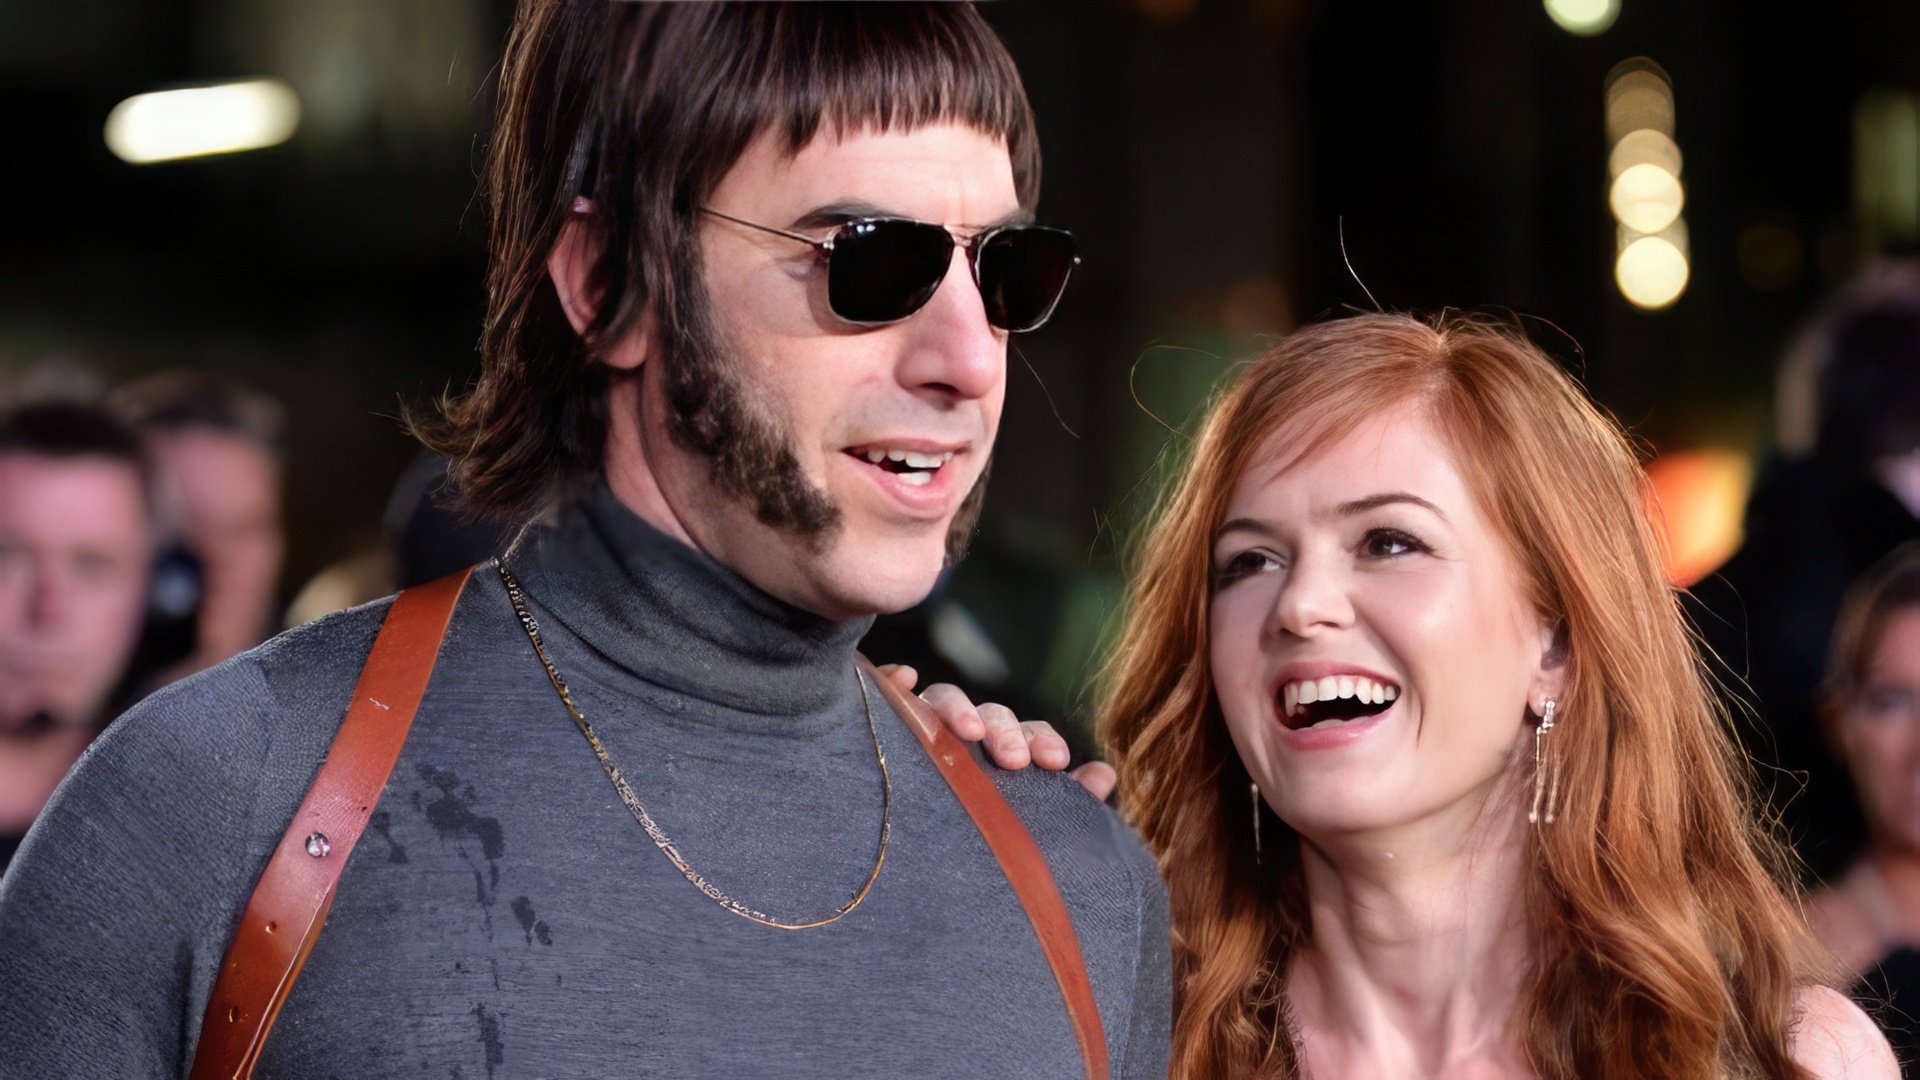 In Grimsby, Isla Fisher starred with her husband for the first time